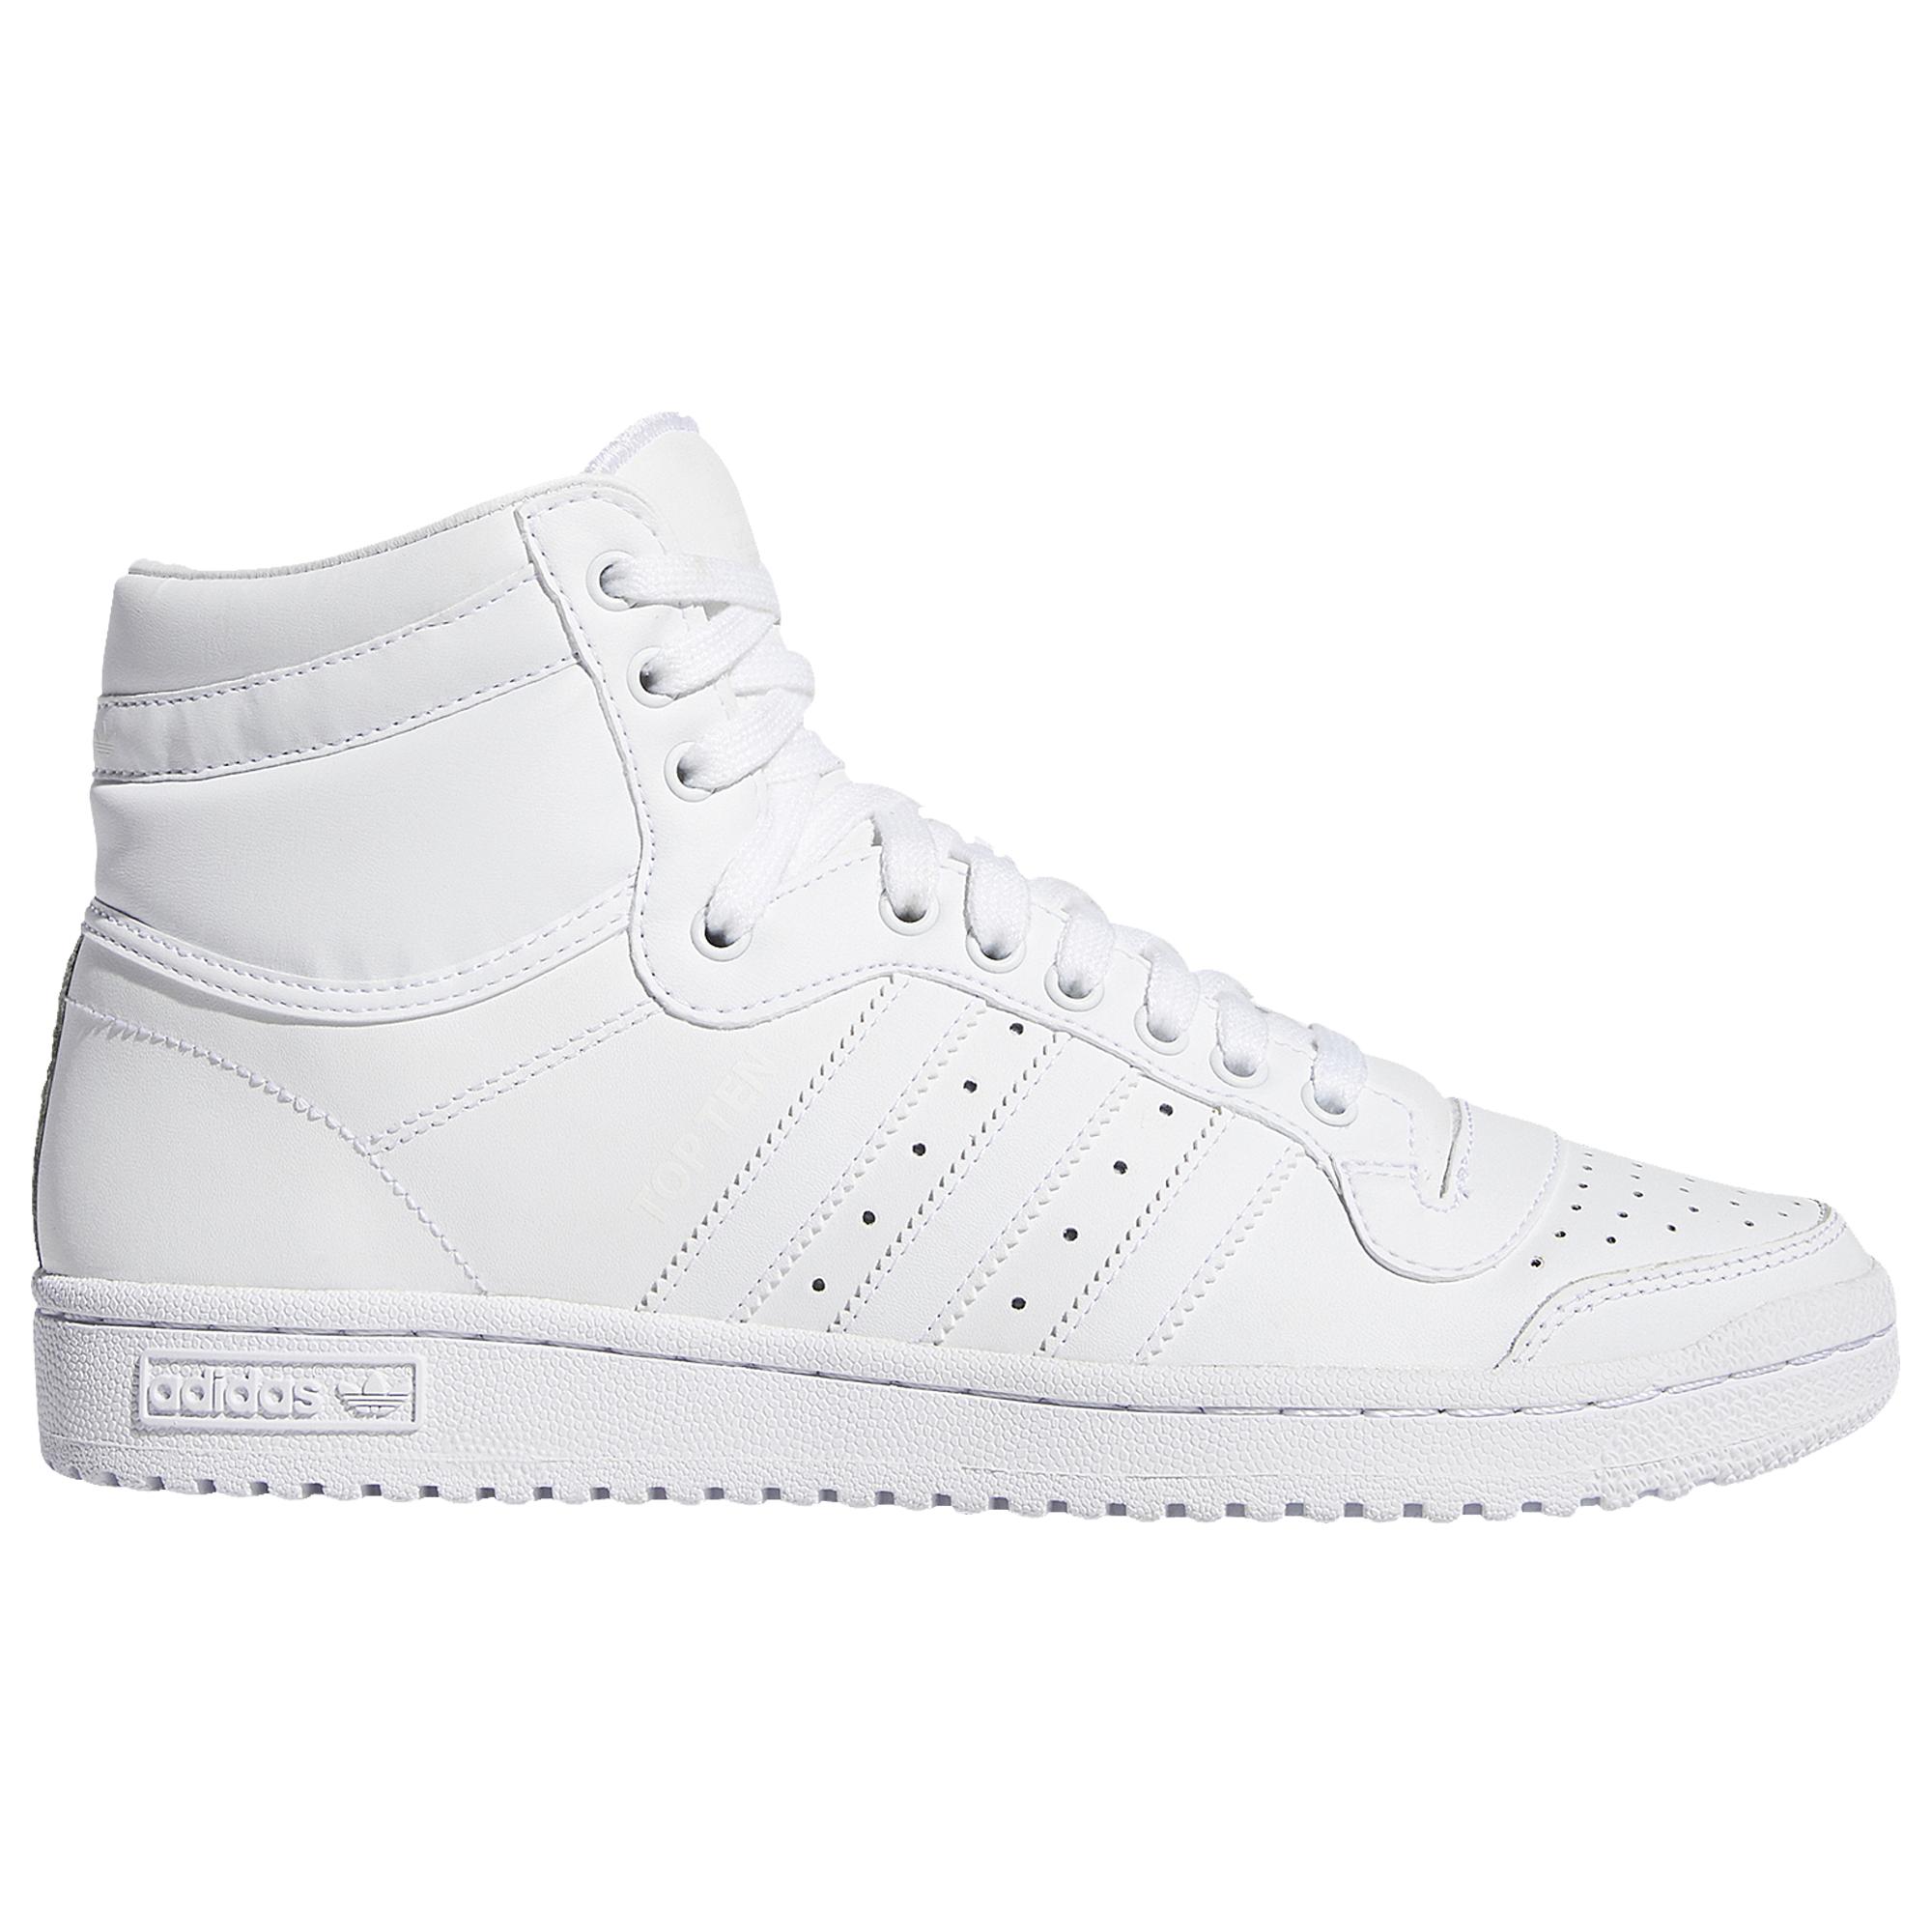 adidas Originals Leather Top Ten Hi Basketball Shoes in White/White ...